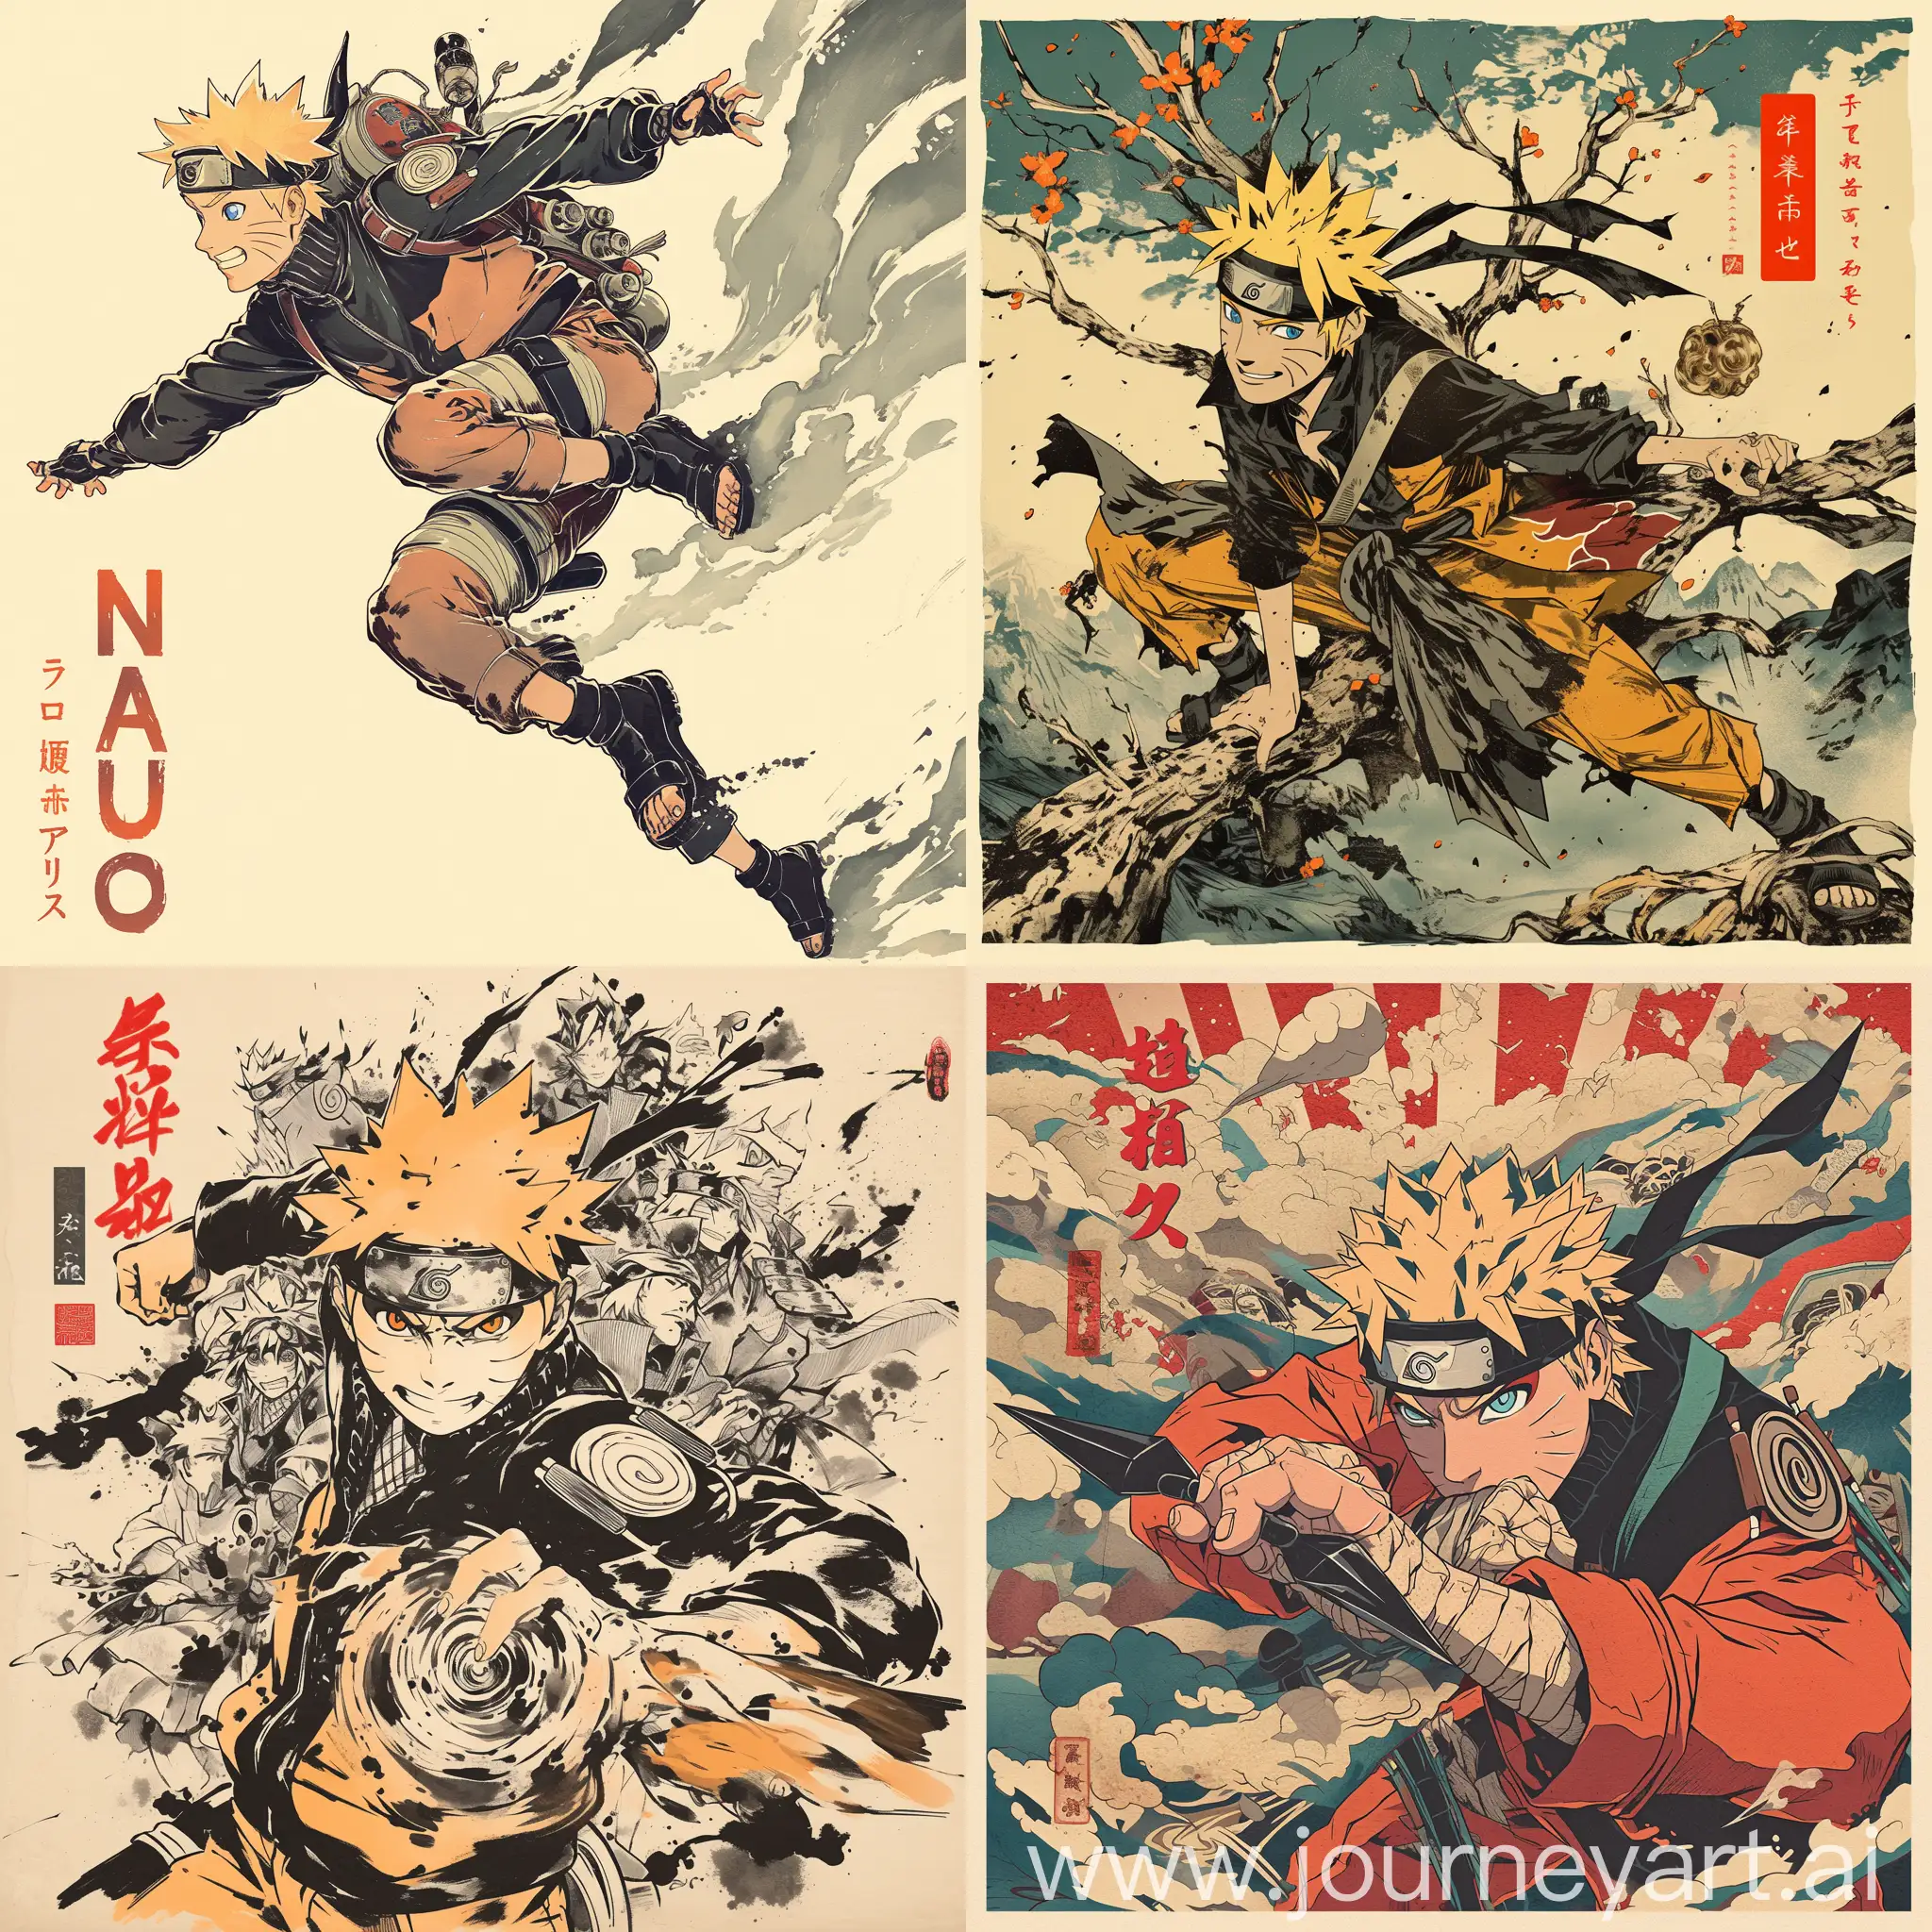 {Naruto}, {Naruto/Naruto}, in the style of a Sumi-e Ink poster design, meticulously detailed, heroic masculinity --niji 6